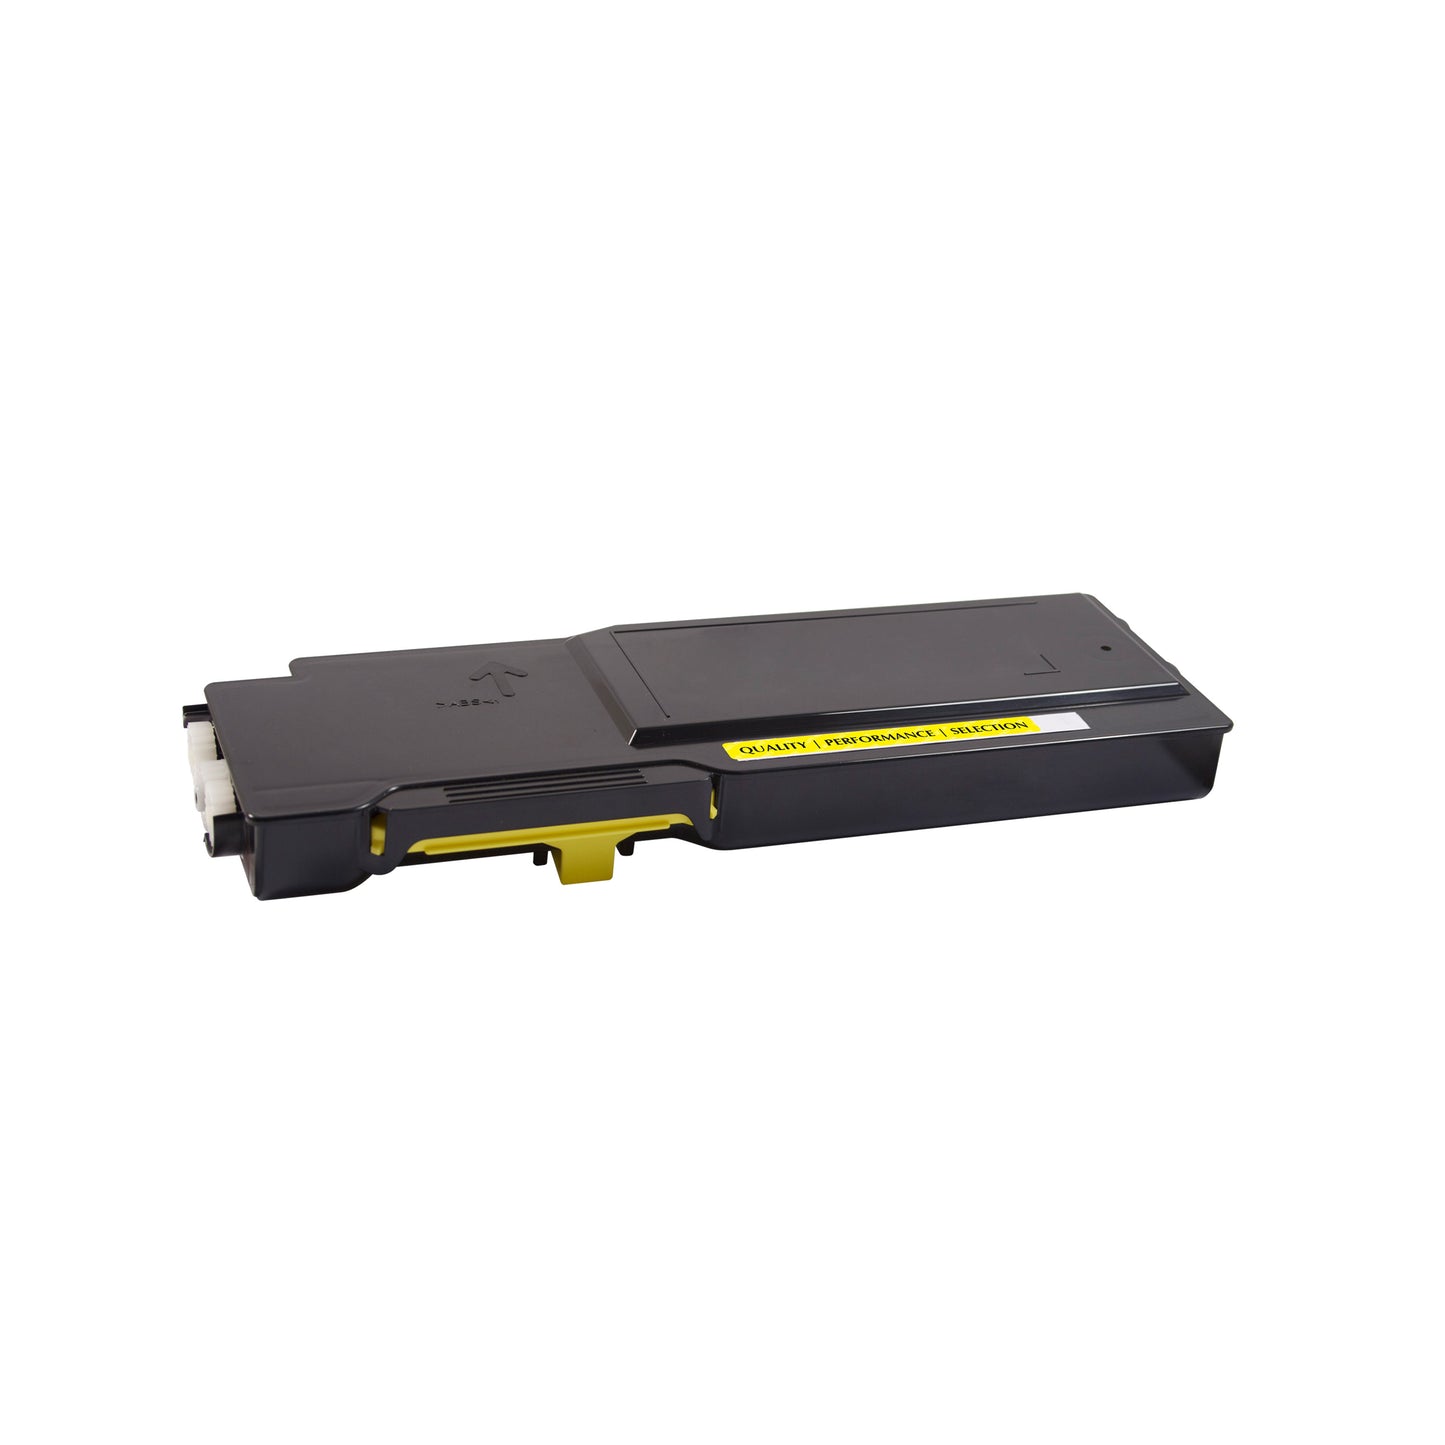 Dell C2660 Remanufactured High Yield Yellow Toner Cartridge